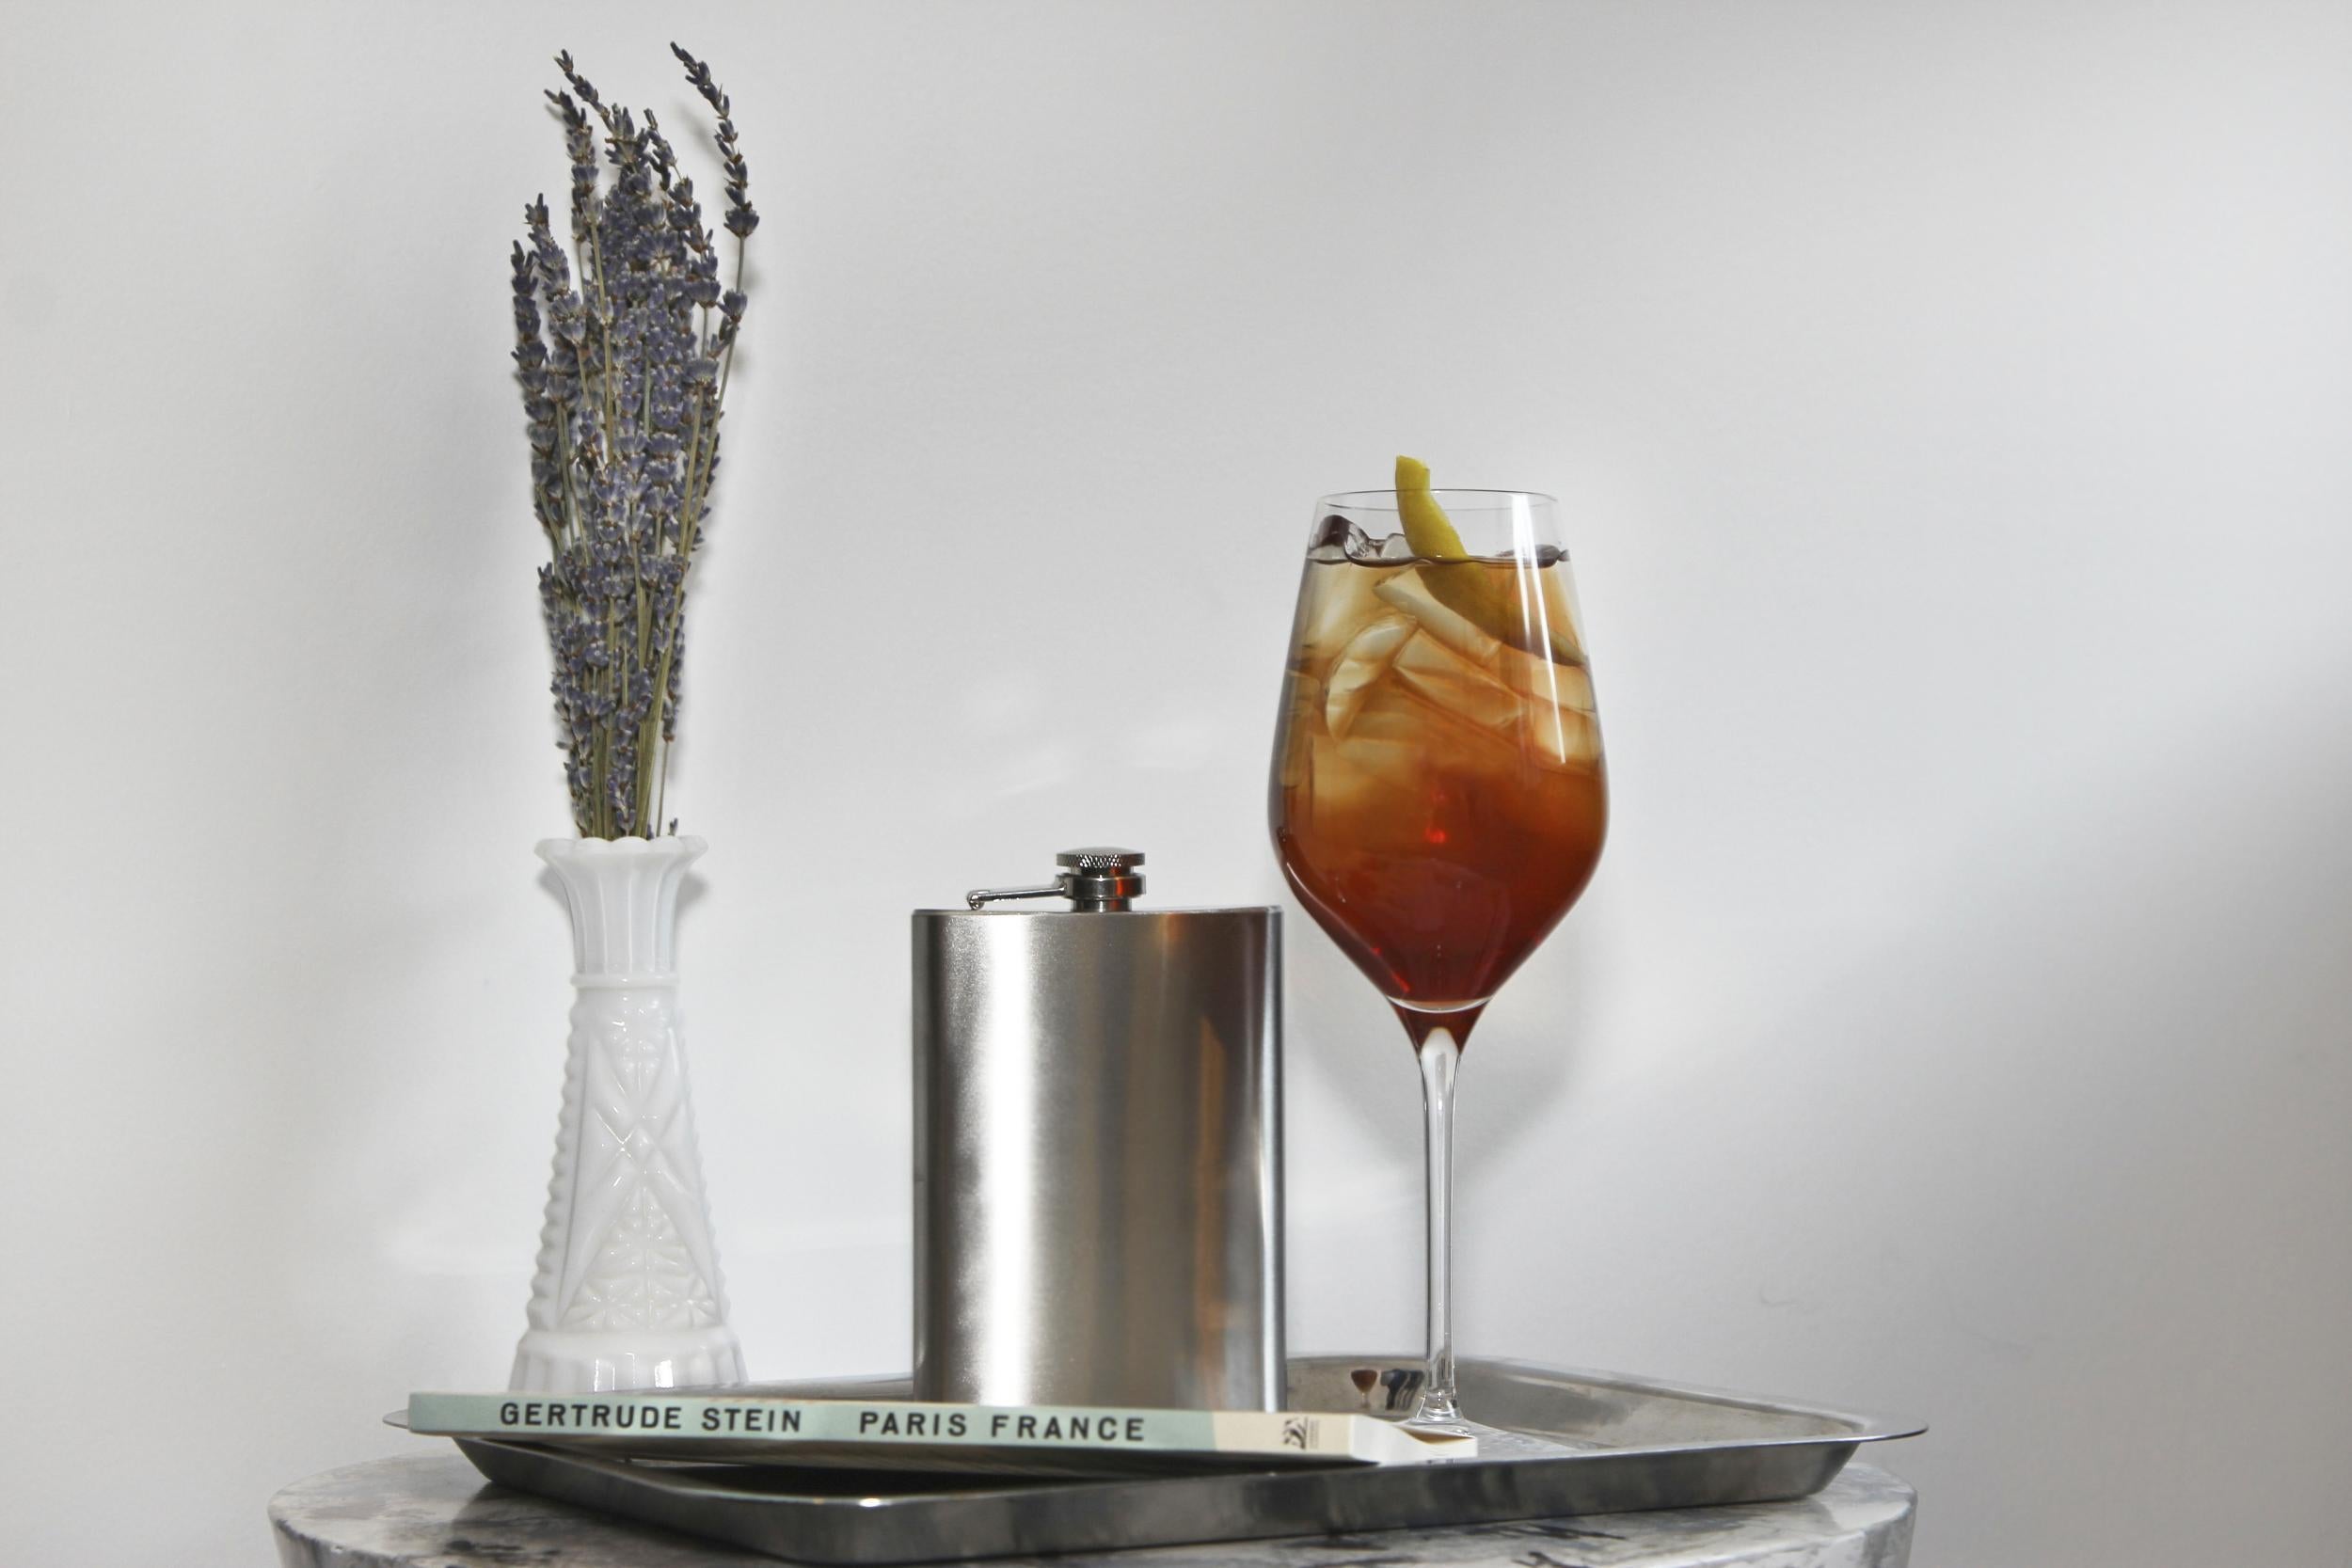 &#13;
The hotel has even created a cocktail in honour of Gertrude Stein (Sean T Ackley)&#13;